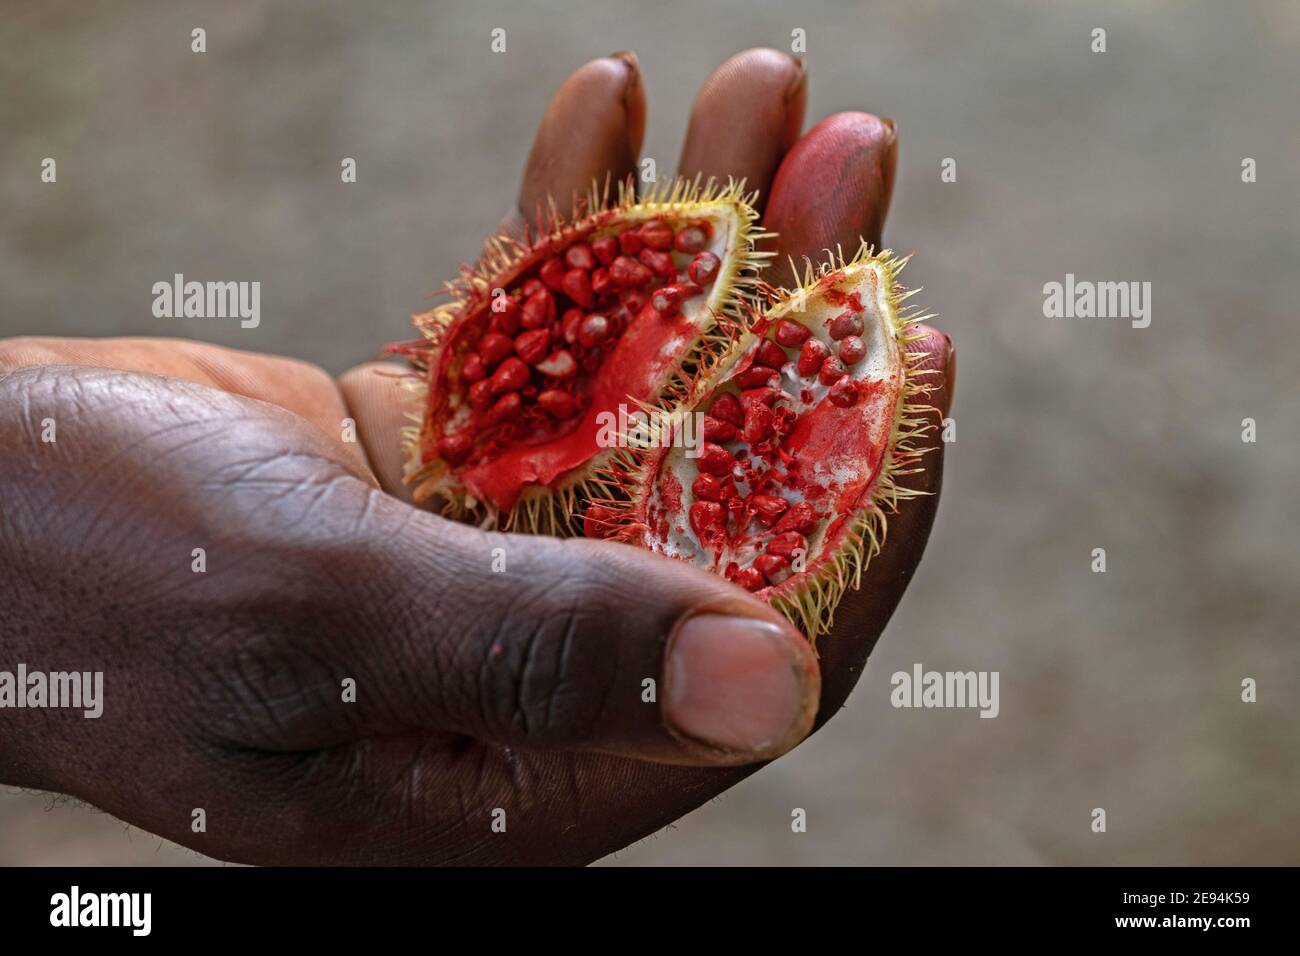 Close-up of mature achiote (Bixa orellana) pods, showing the red seeds, source of annatto, a natural orange-red condiment used as food coloring Stock Photo